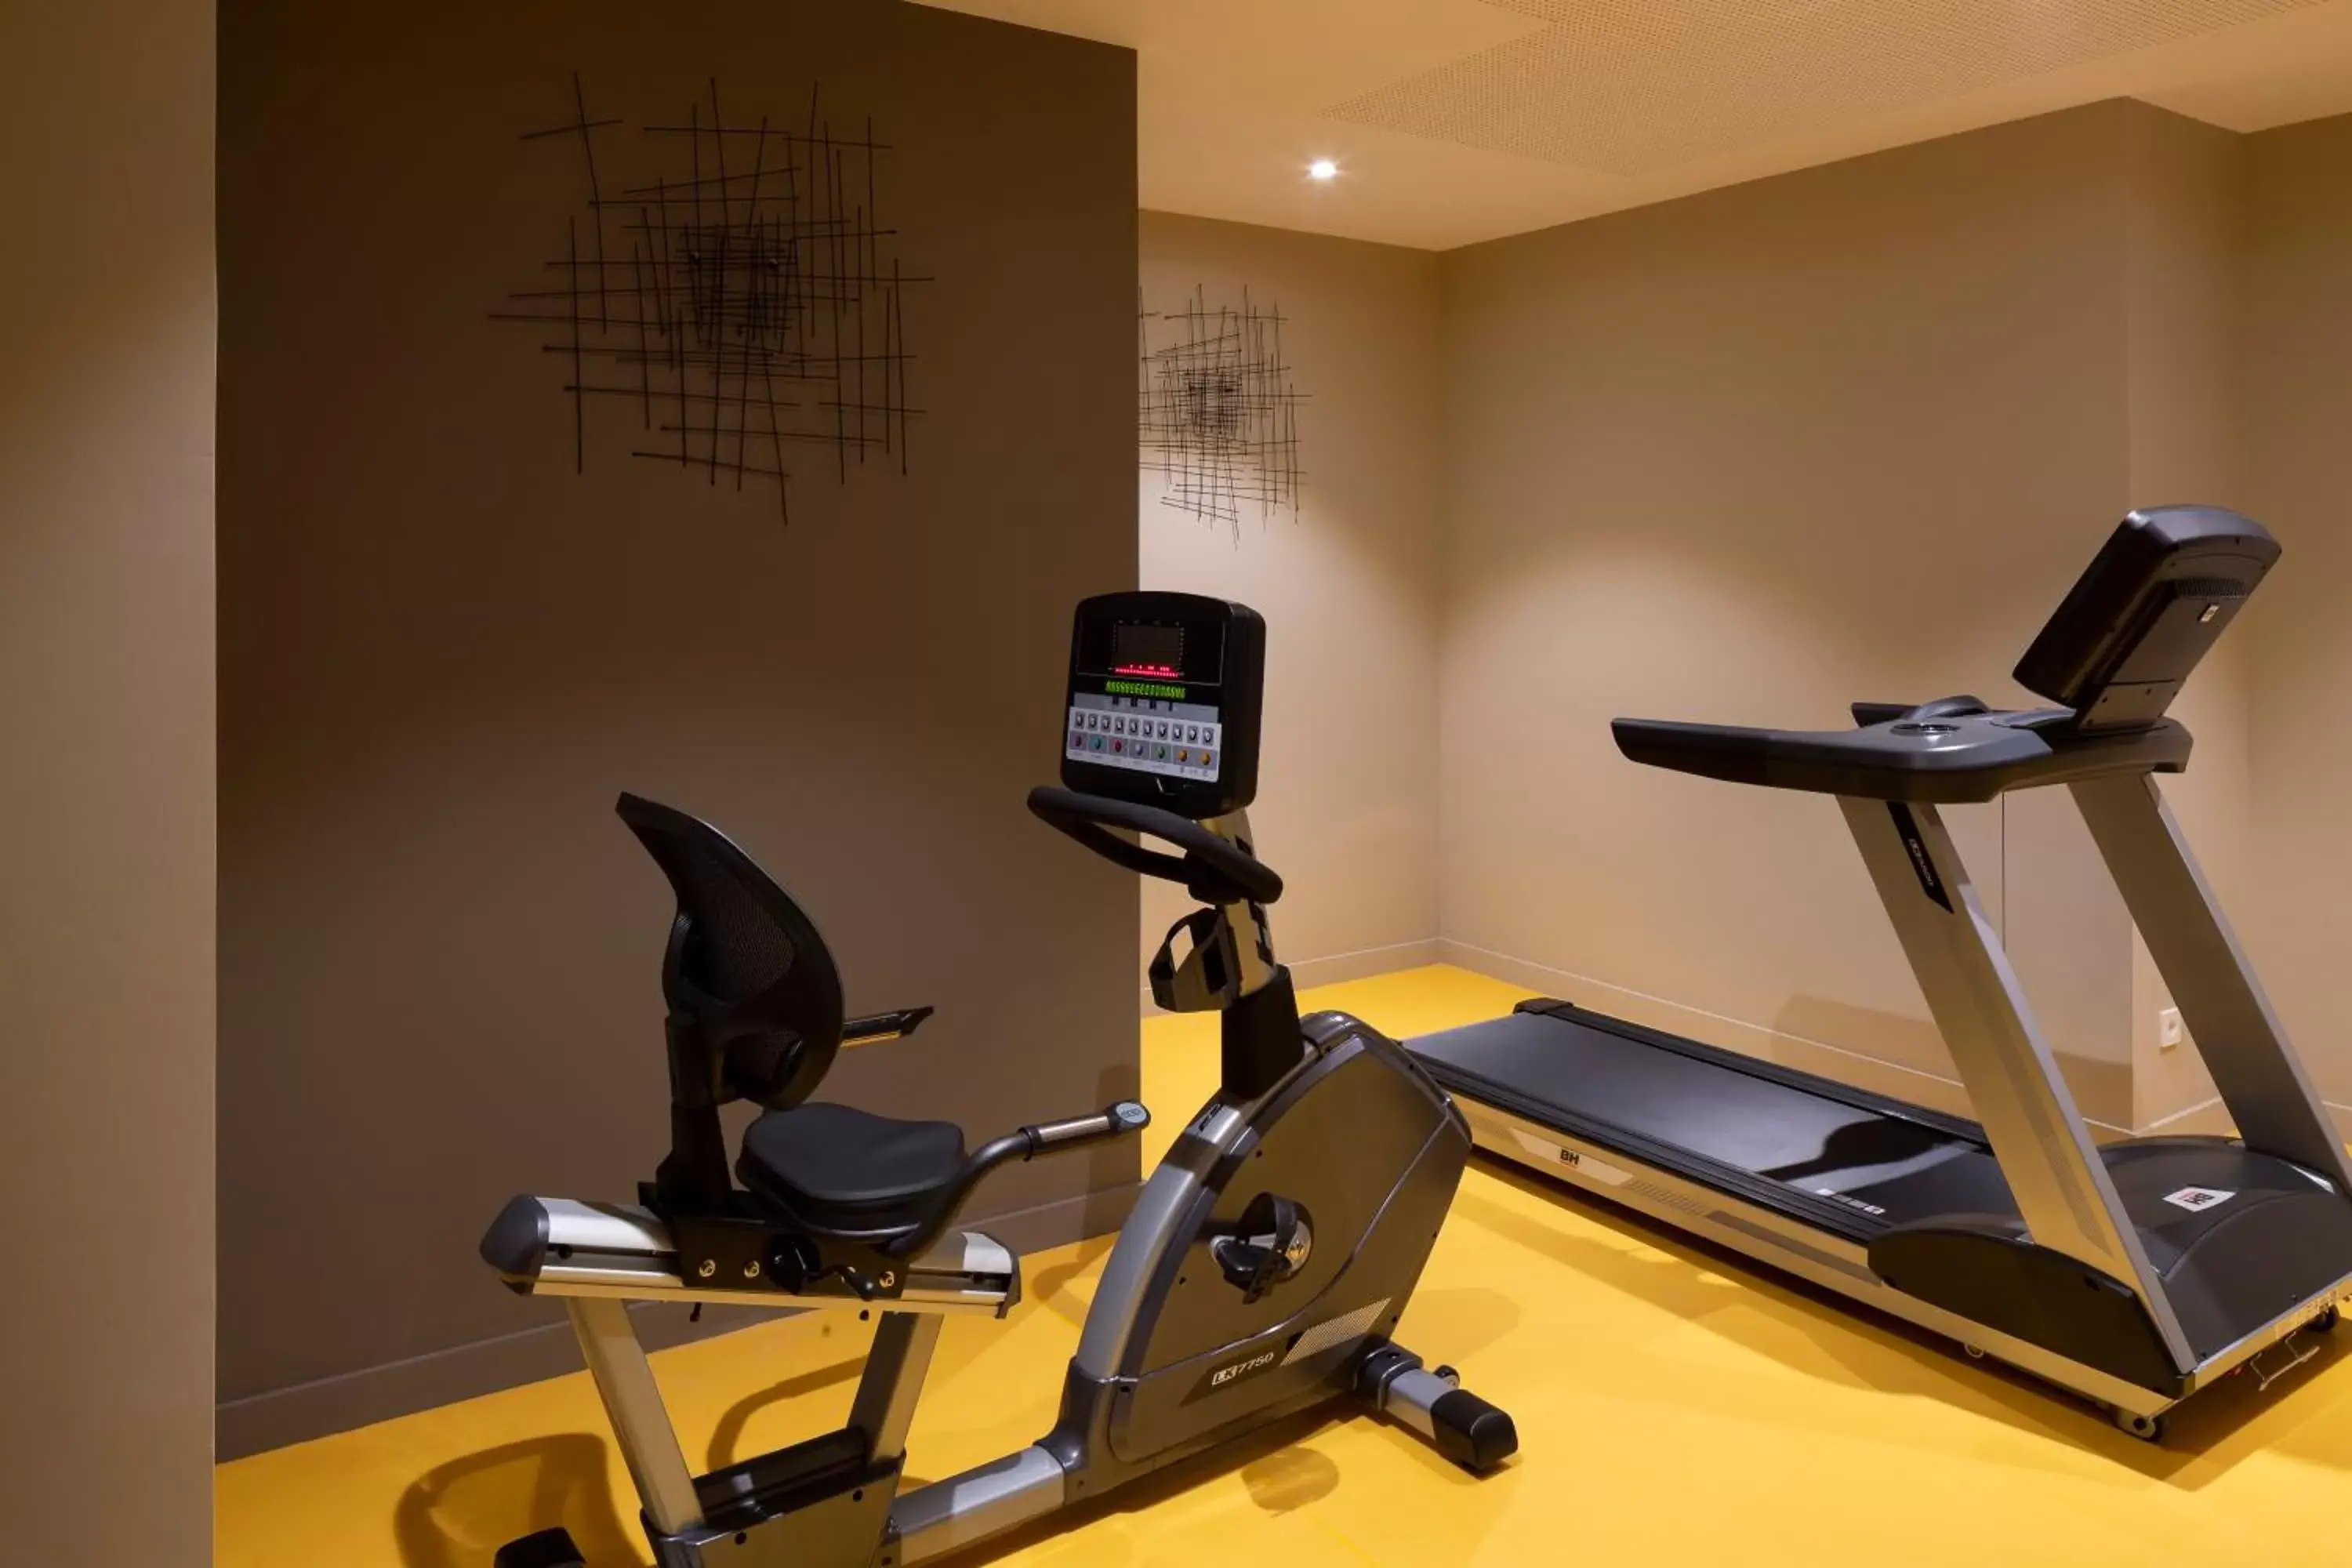 Fitness centre/facilities, Fitness Center/Facilities in Apparthotel 37 Lodge - Courbevoie La Défense